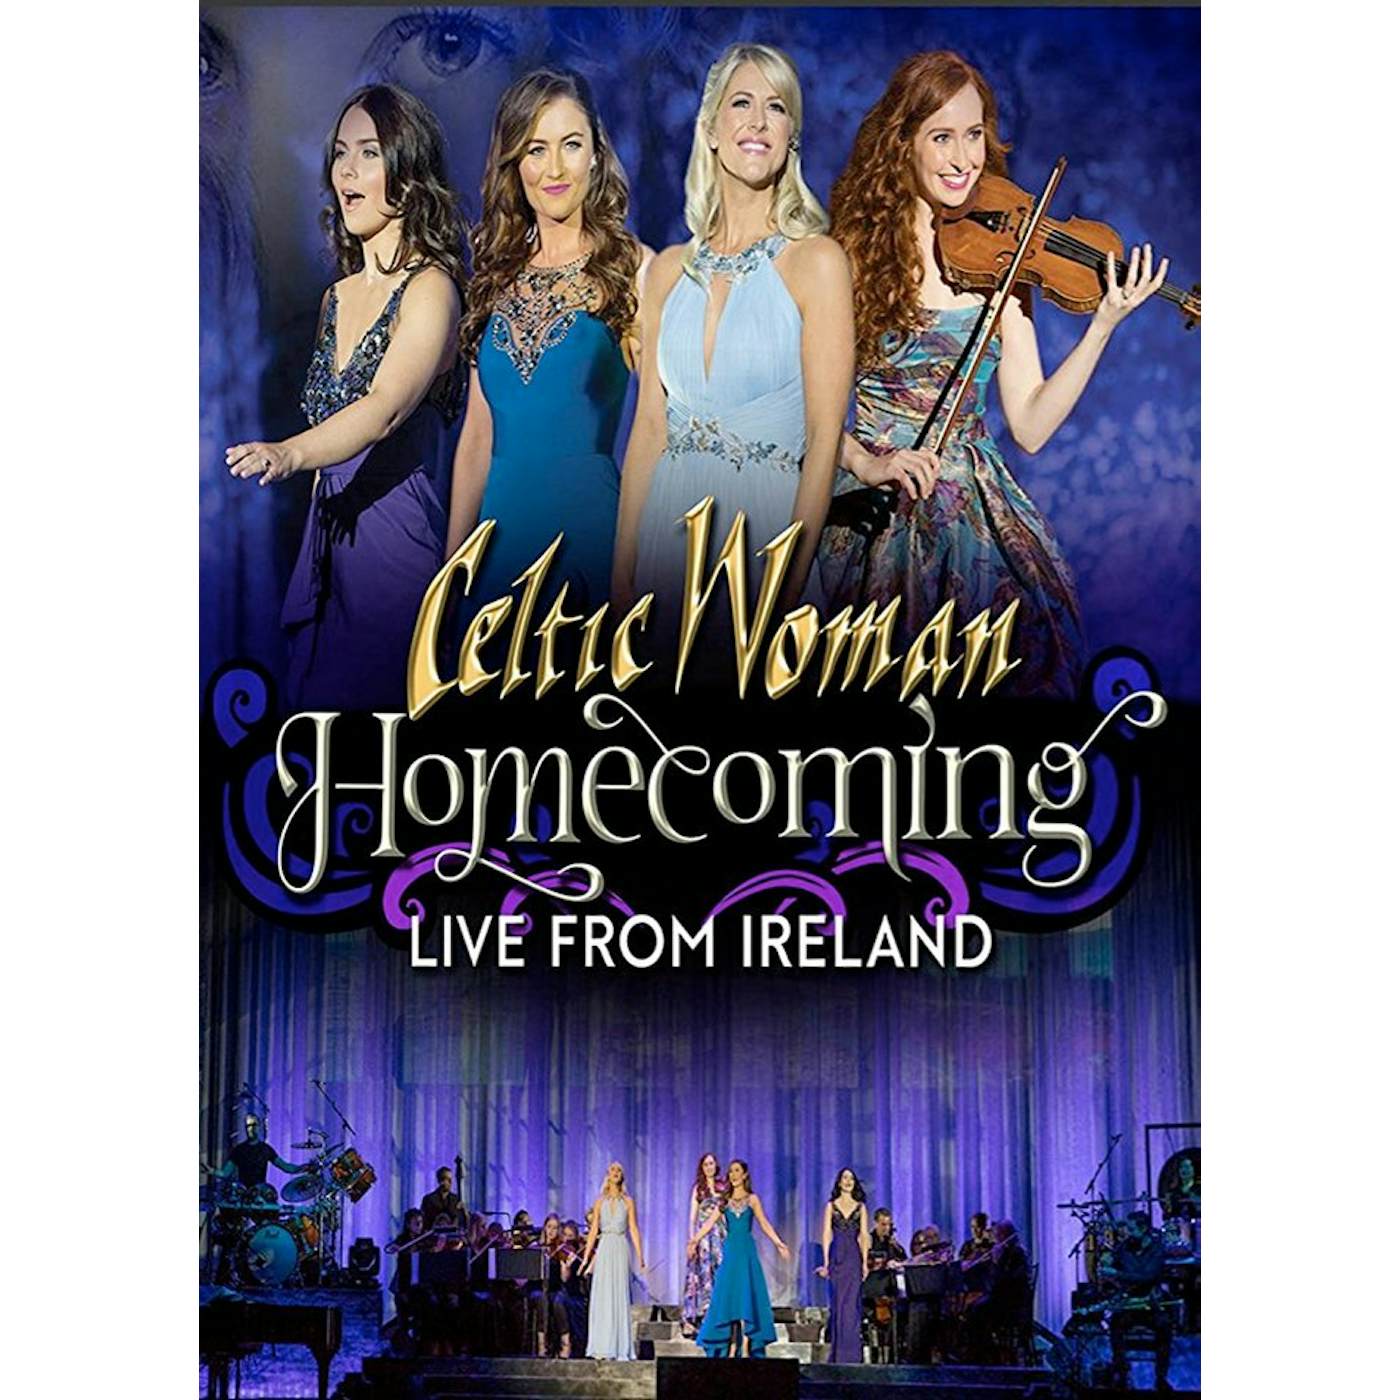 Celtic Woman HOMECOMING: LIVE FROM IRELAND DVD